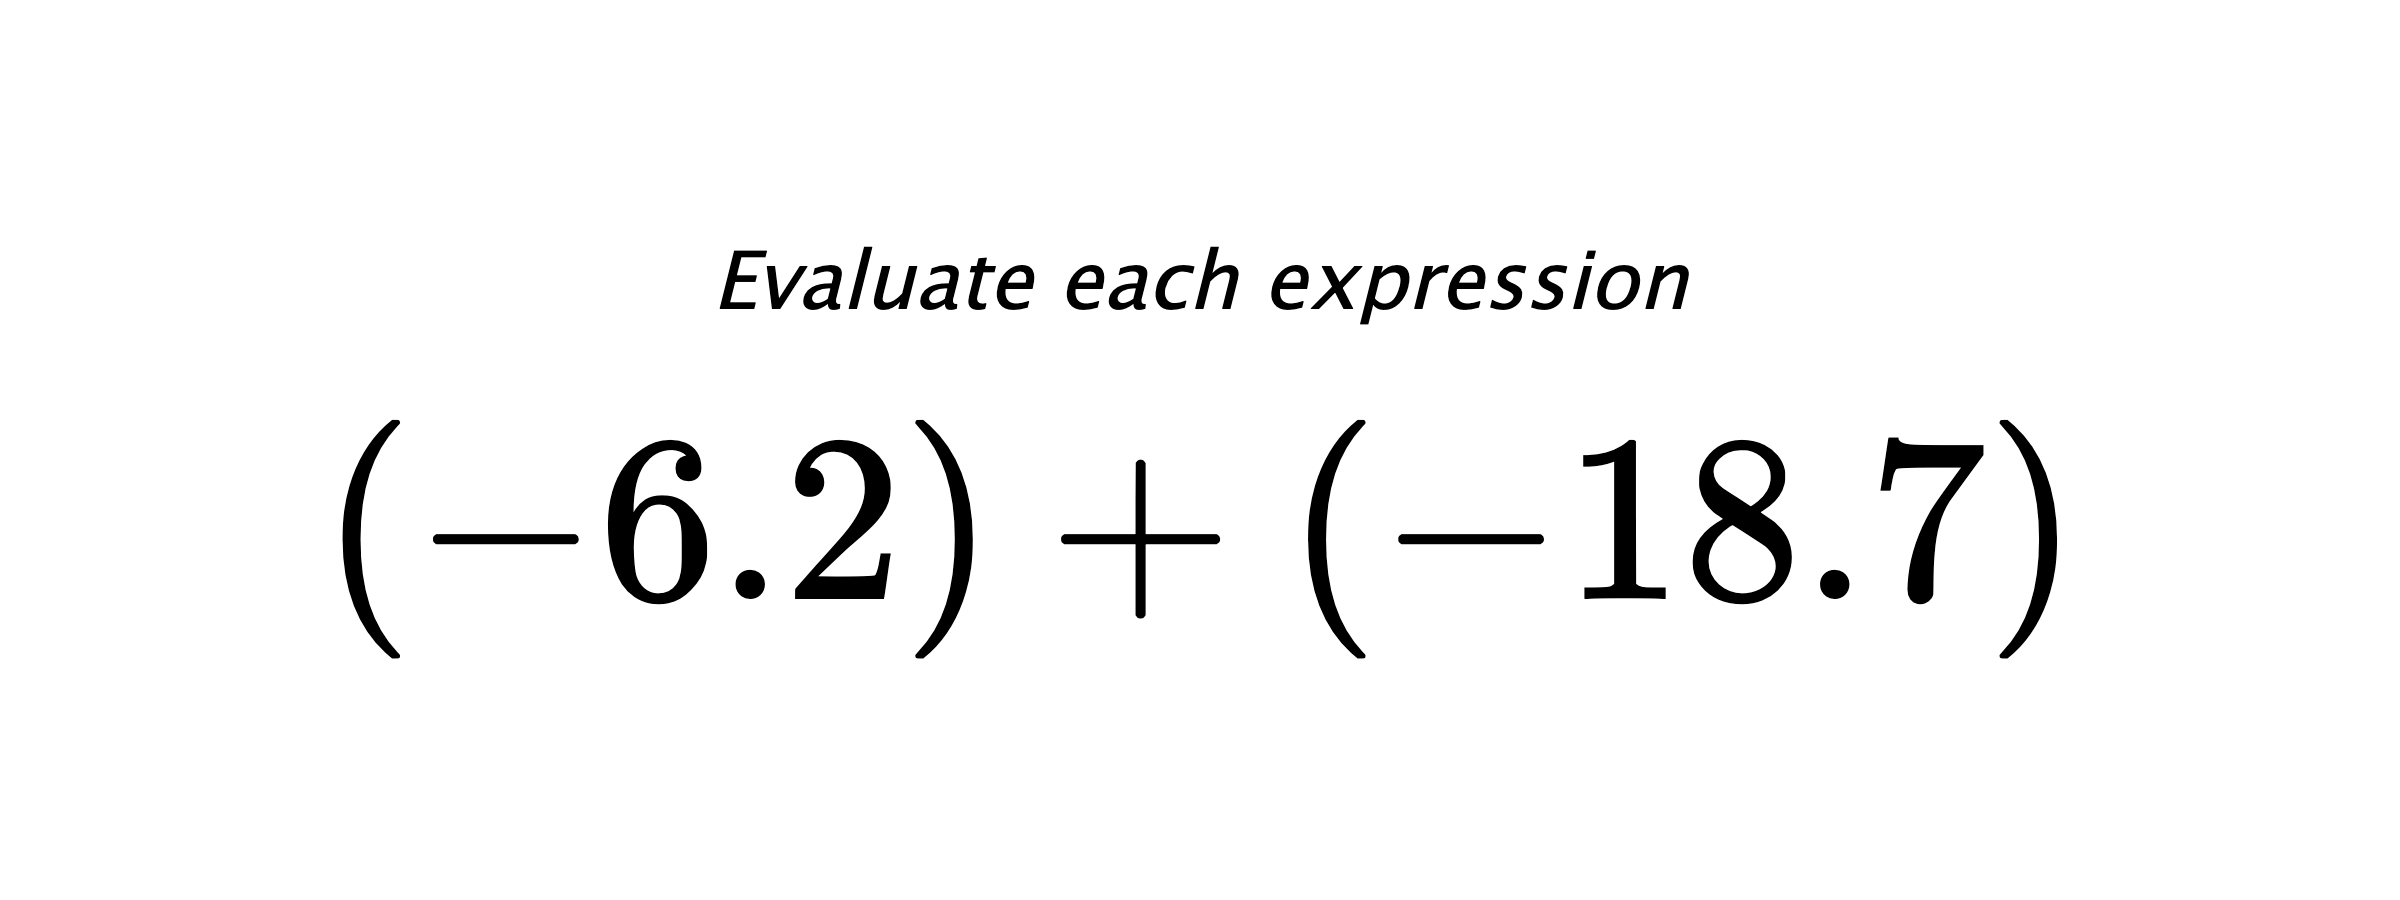 Evaluate each expression $ (-6.2)+(-18.7) $